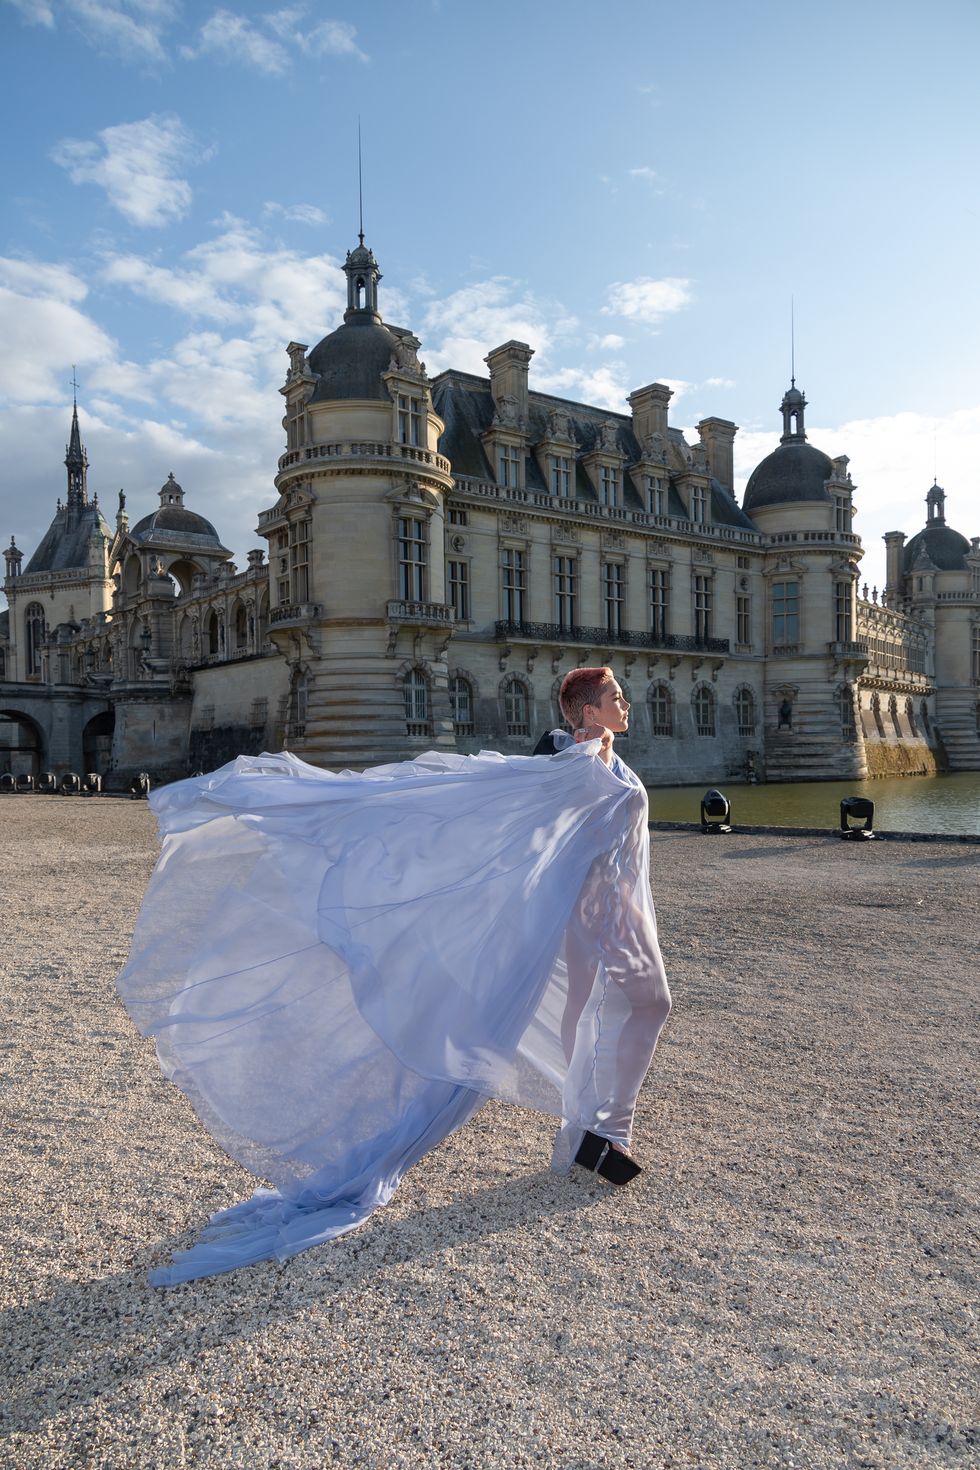 chantilly, france 05 july editorial use non-editorial use only please get approved by fashion house florence pugh attends valentino haute couture fall winter 20232024 show during paris fashion week at château chantilly 05 july 2023 in chantilly, france photo: marc piasekiwireimage